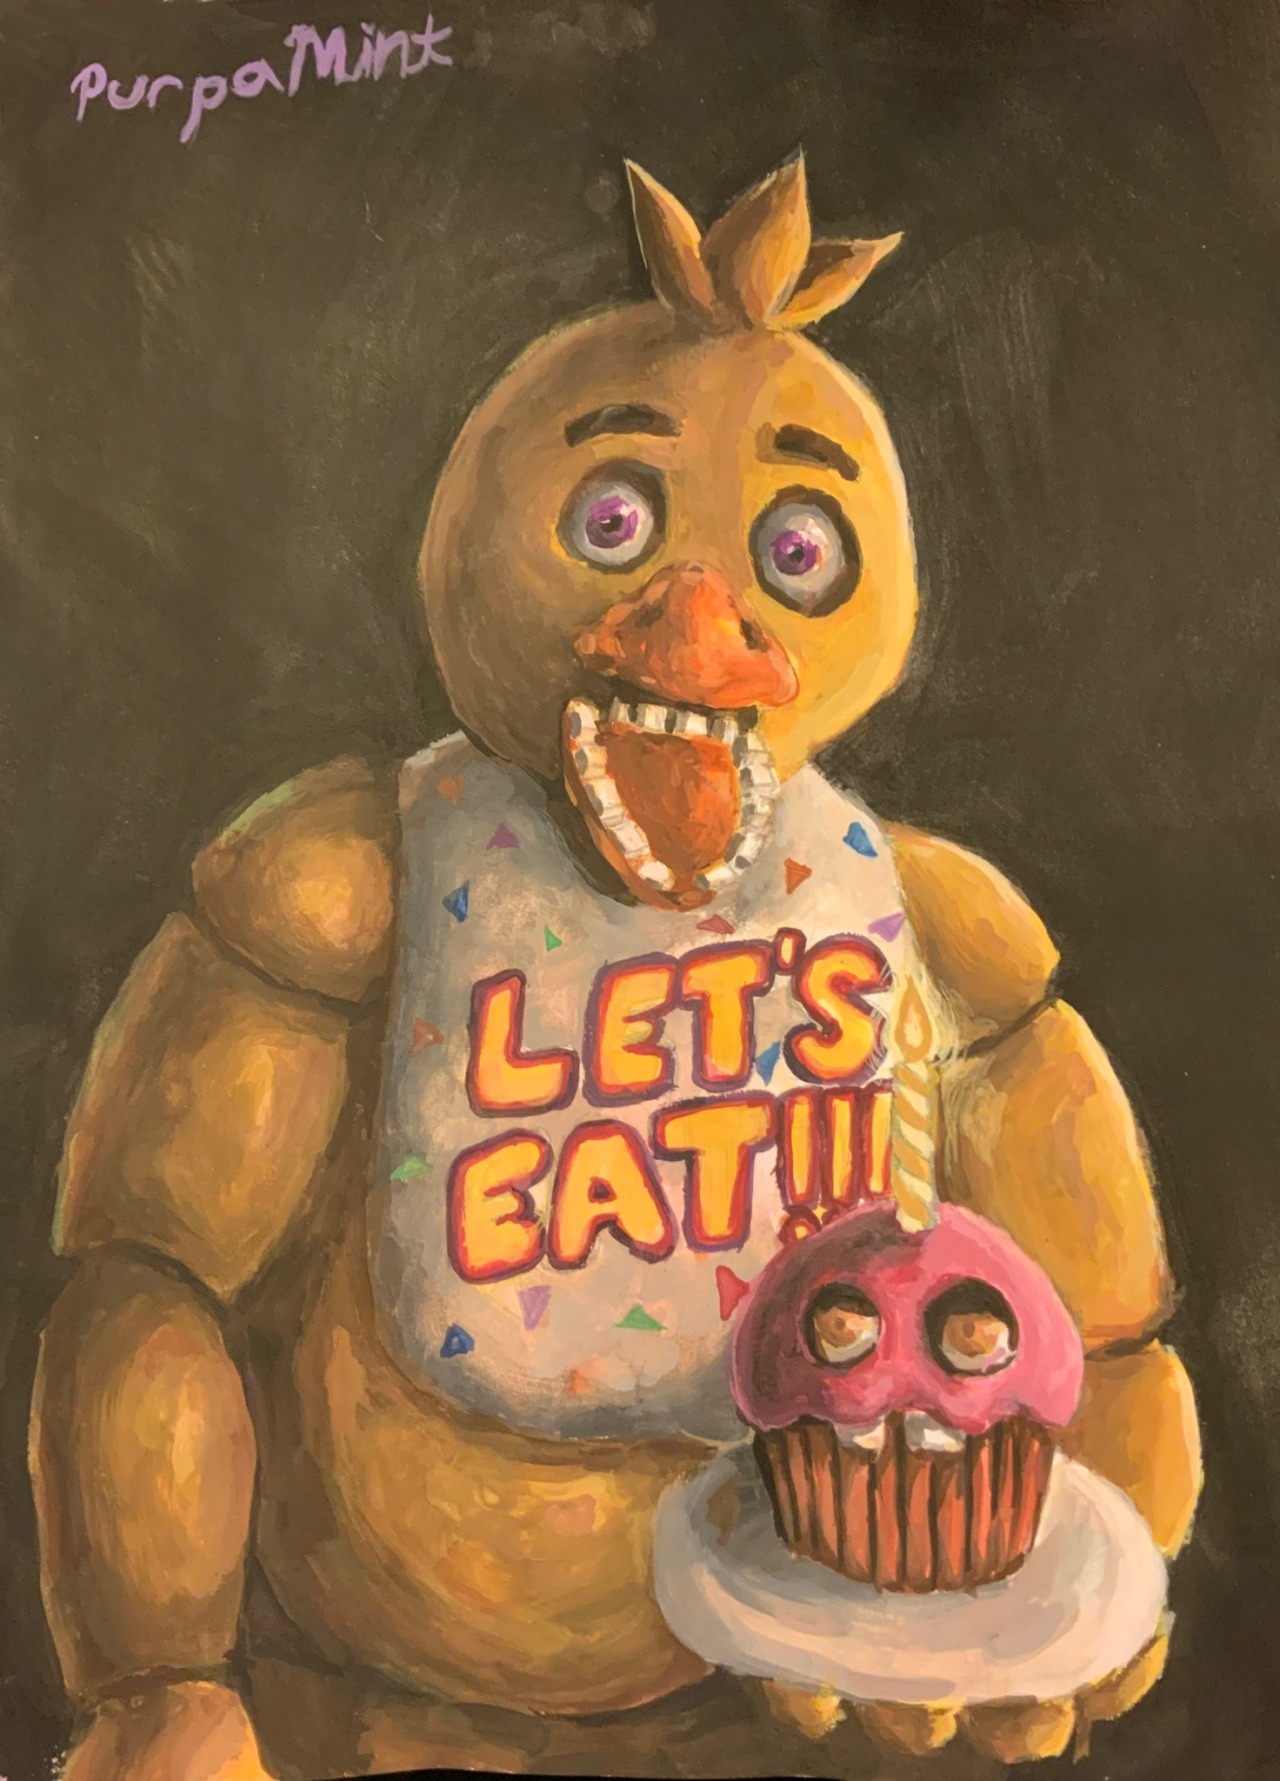 PC / Computer - Five Nights at Freddy's VR: Help Wanted - Cupcake - The  Models Resource